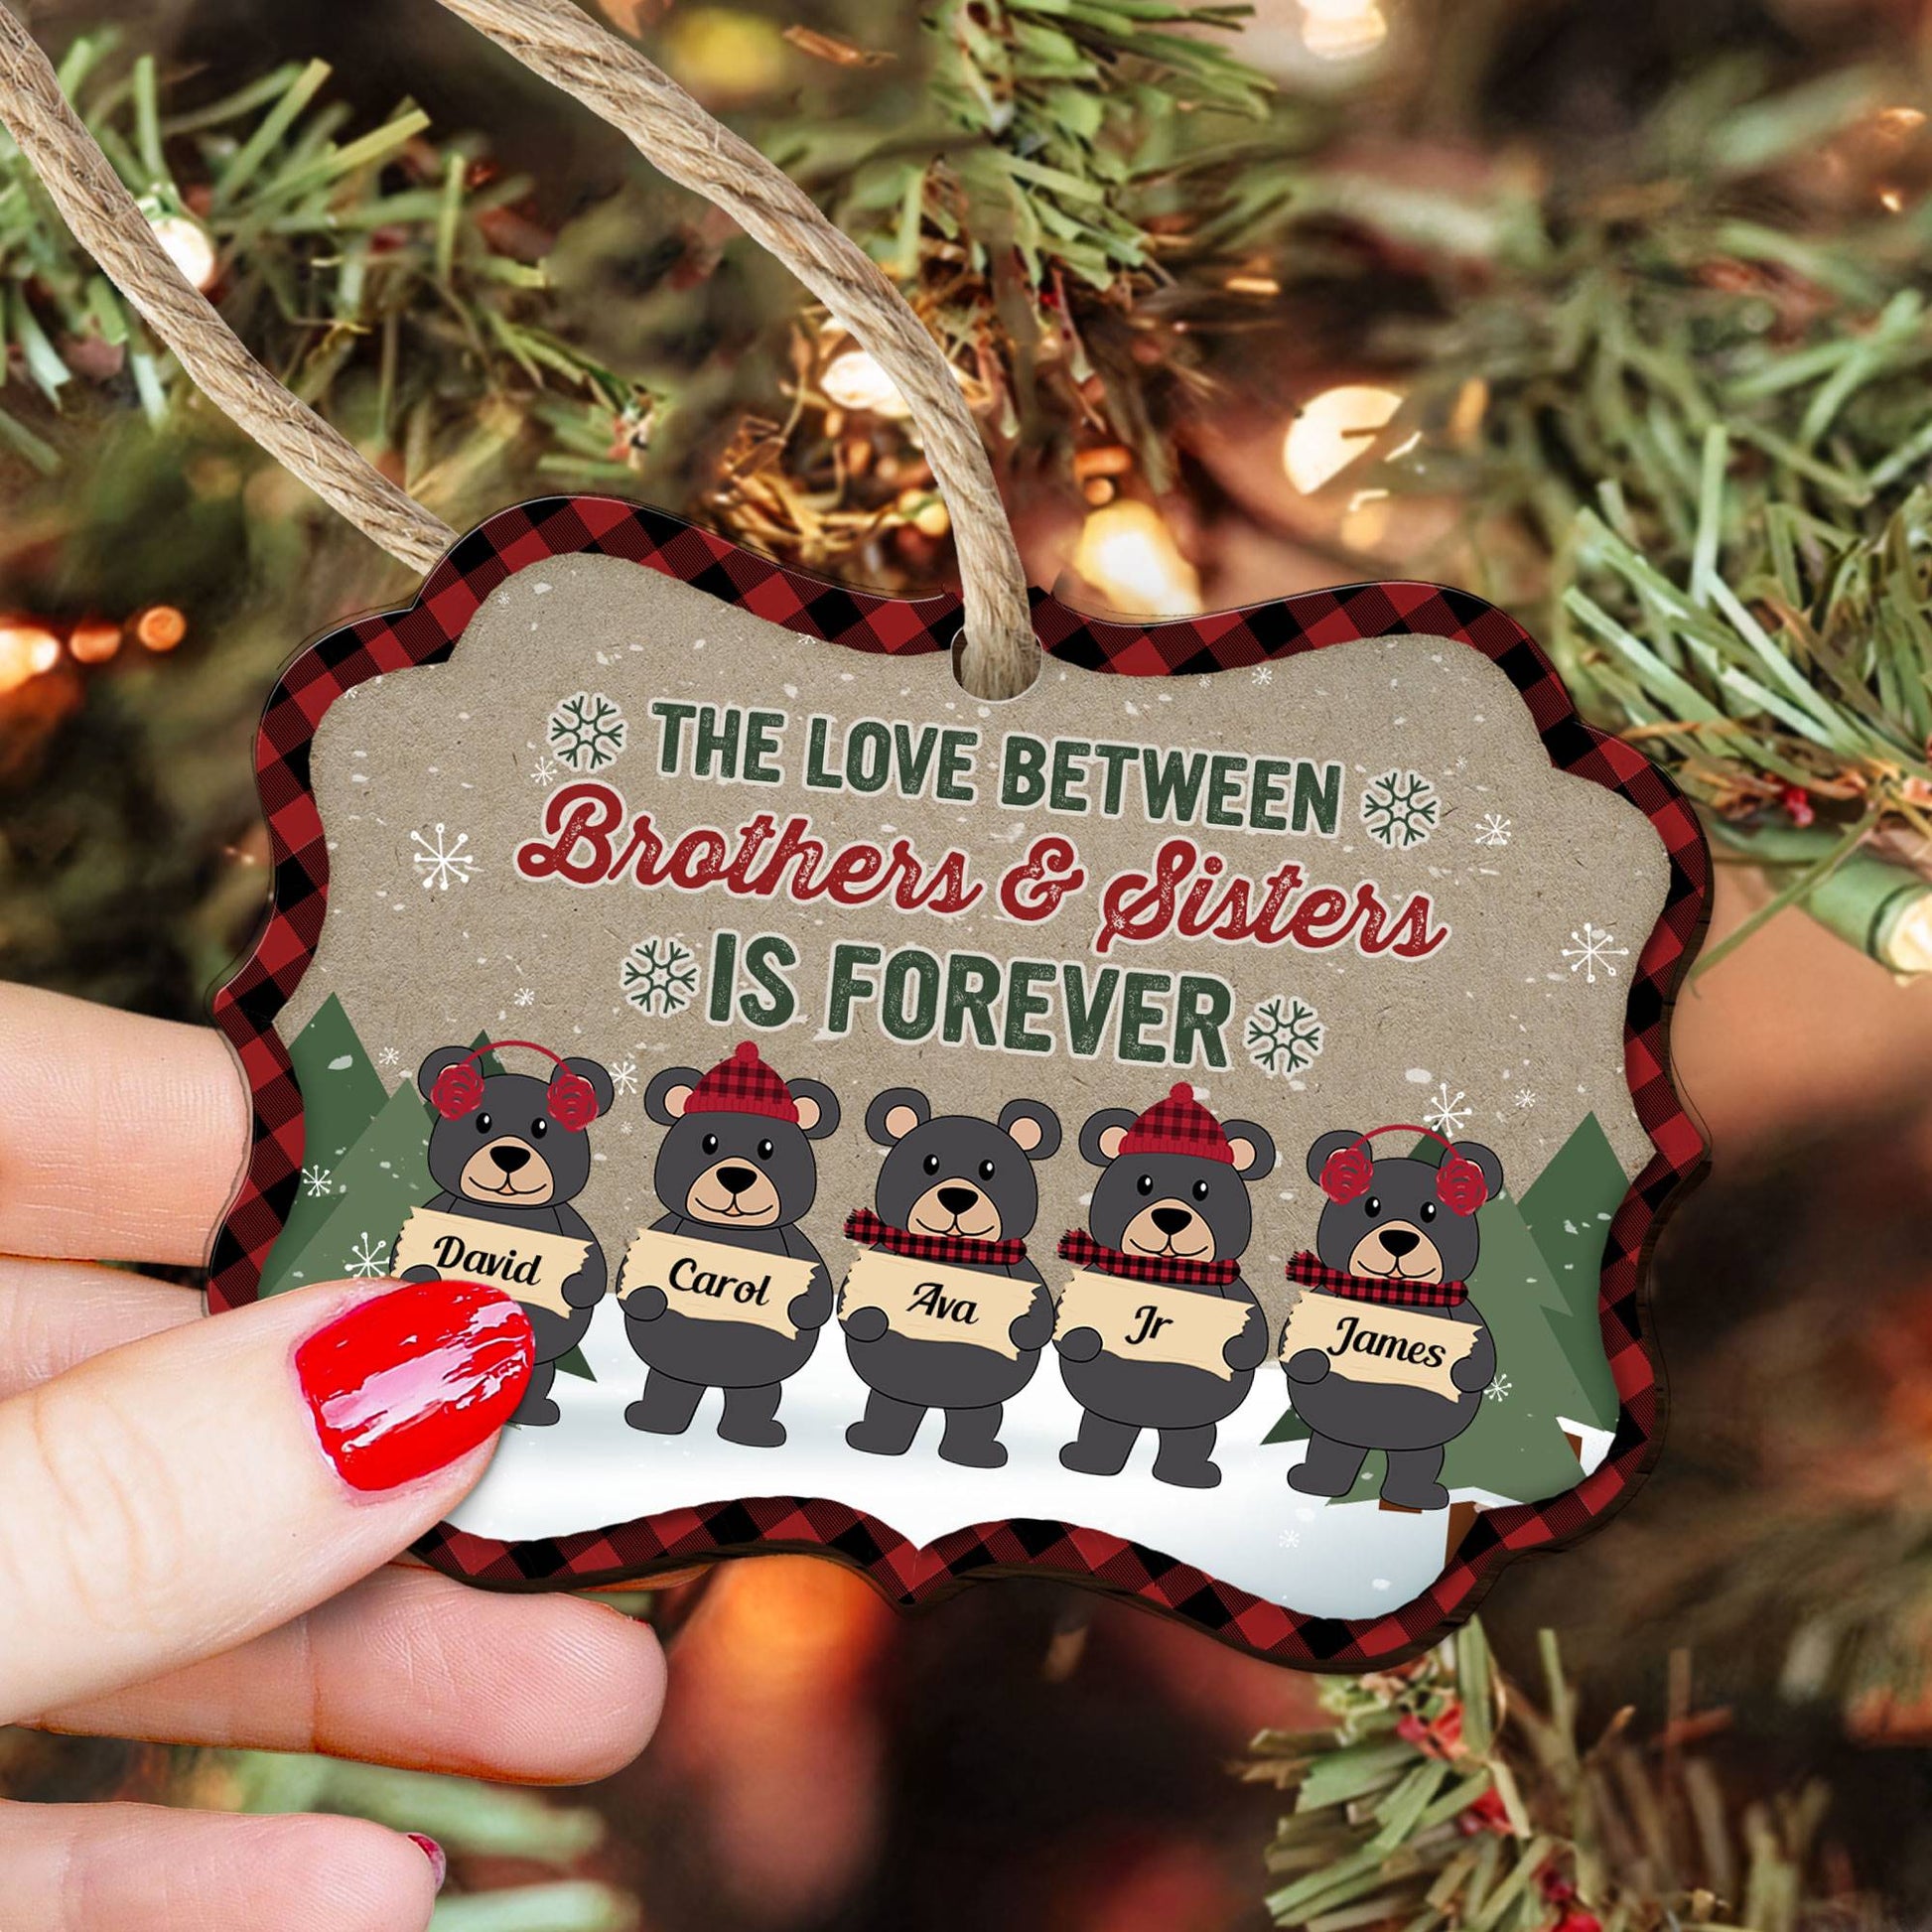 The Love Between Family Is Forever - Personalized Wooden Ornament - Christmas Gift For Family Members  - Bear Family 